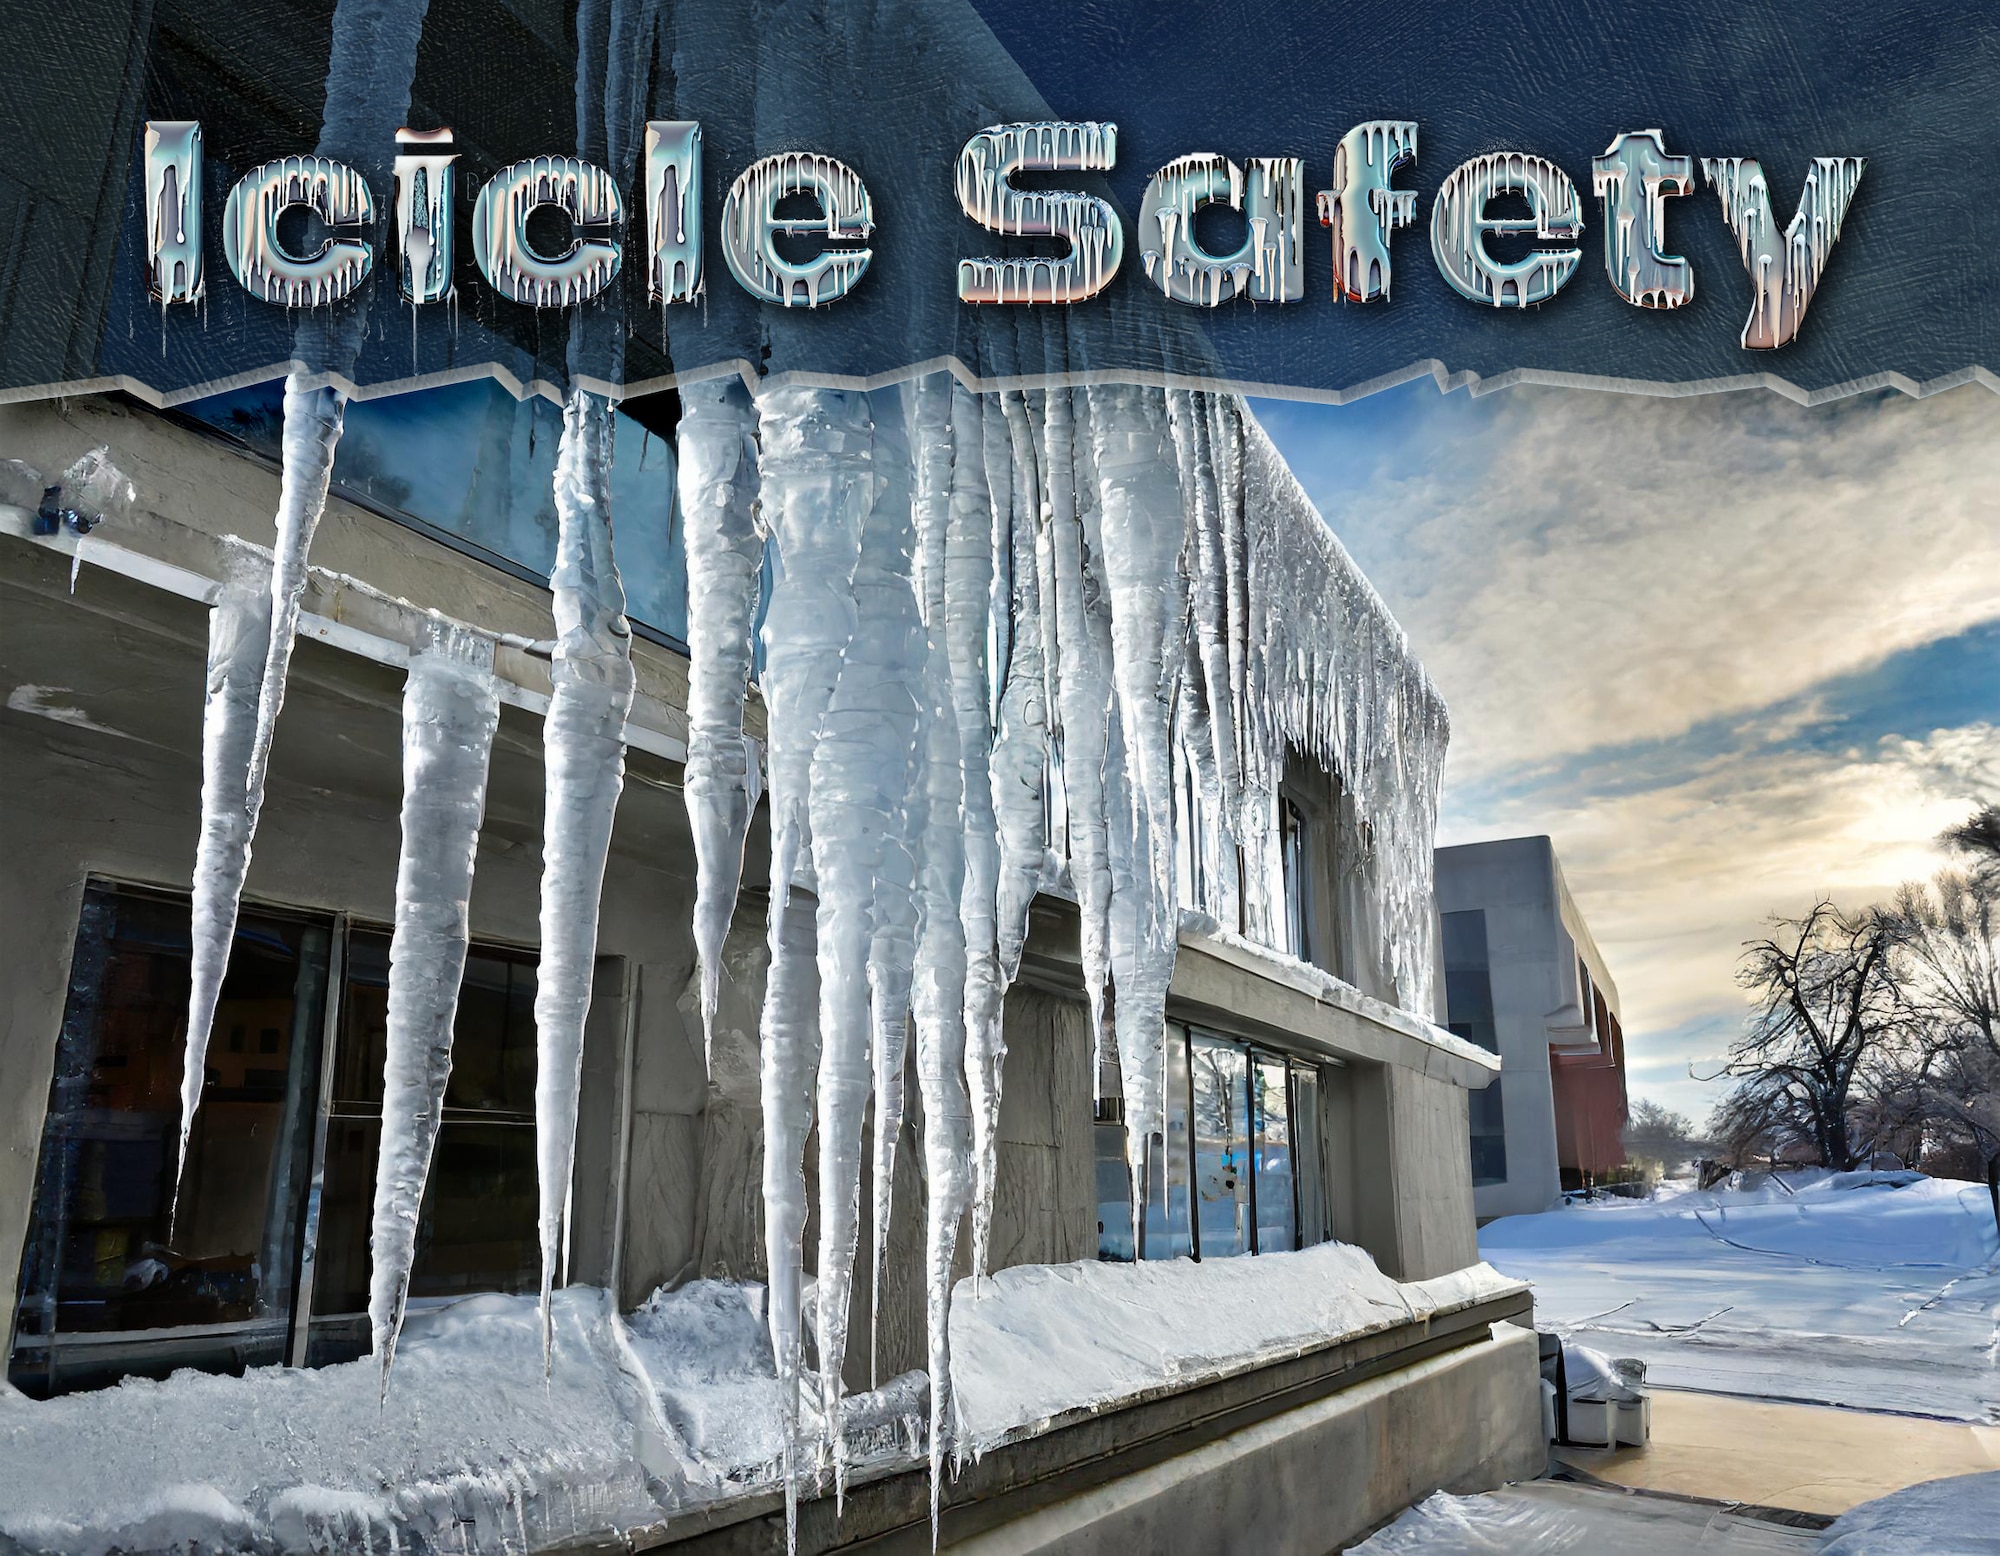 An icicle safety illustration depicting several icicles hanging from a building.